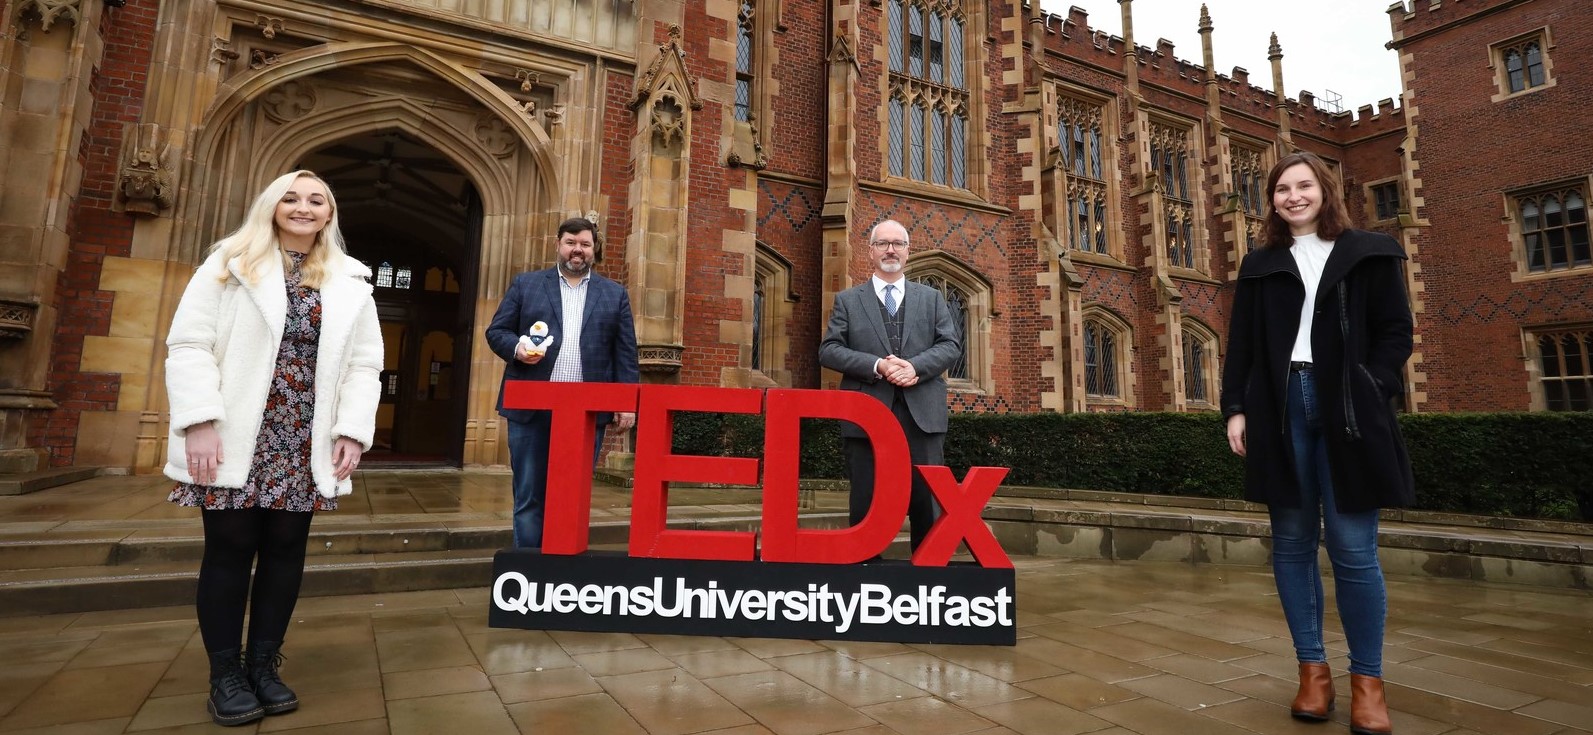 Launching TEDx at Queen's University Belfast in front of the Lanyon Building